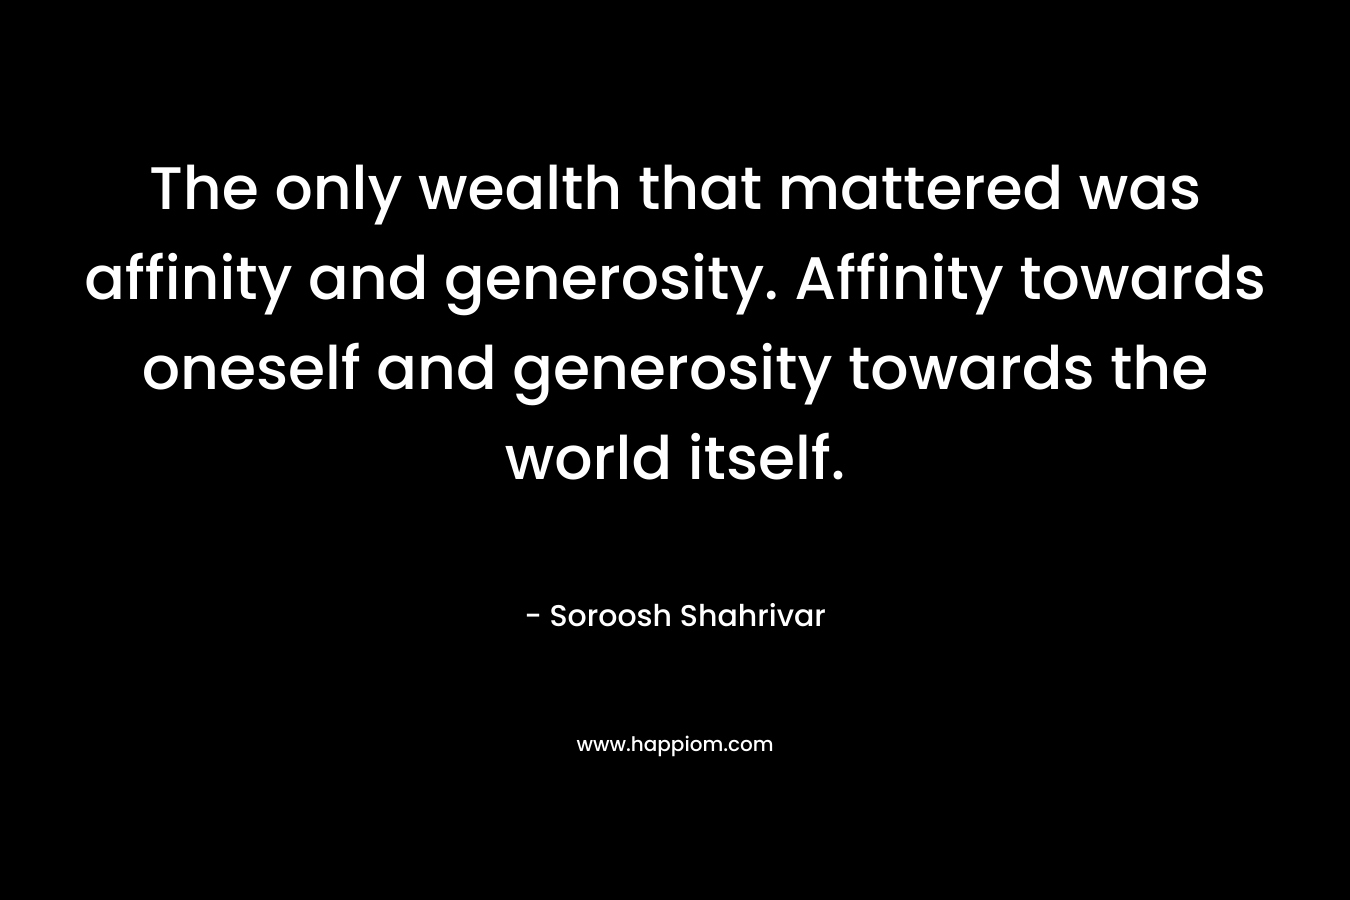 The only wealth that mattered was affinity and generosity. Affinity towards oneself and generosity towards the world itself. – Soroosh Shahrivar